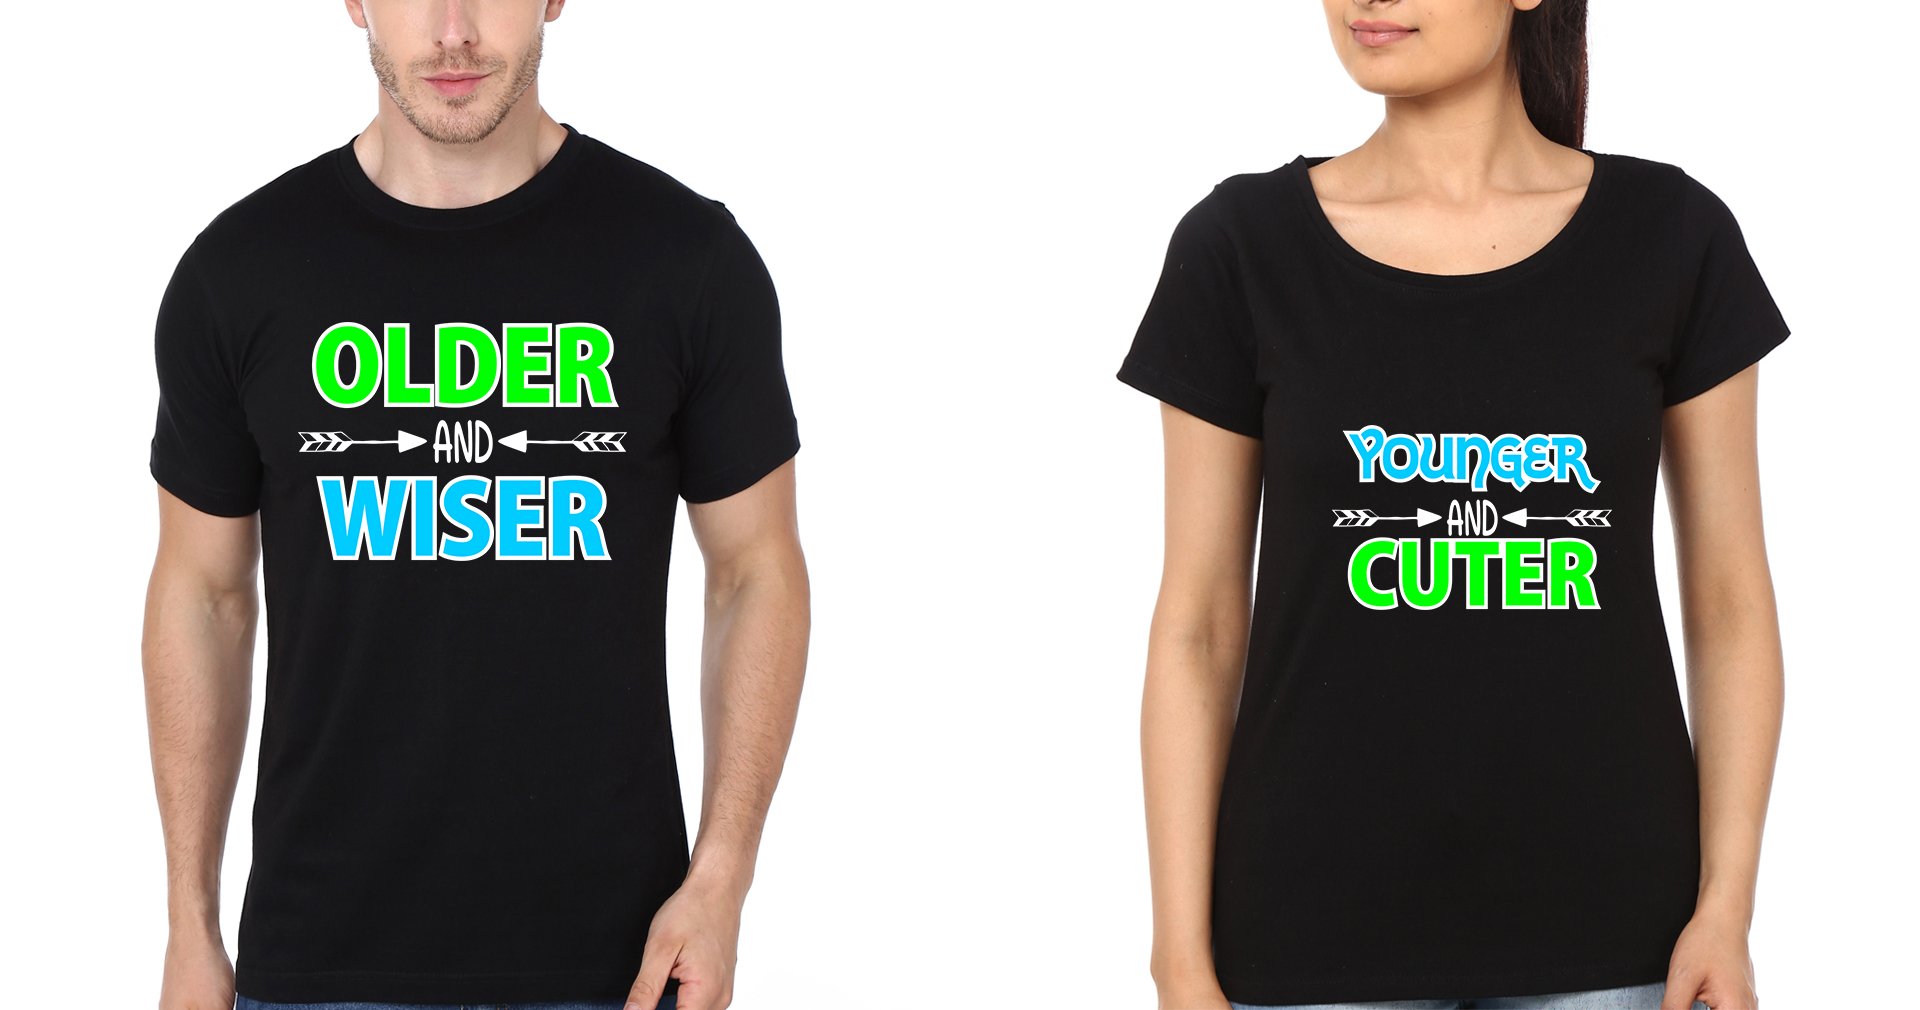 Older and Cuter Brother-Sister Half Sleeves T-Shirts -FunkyTees